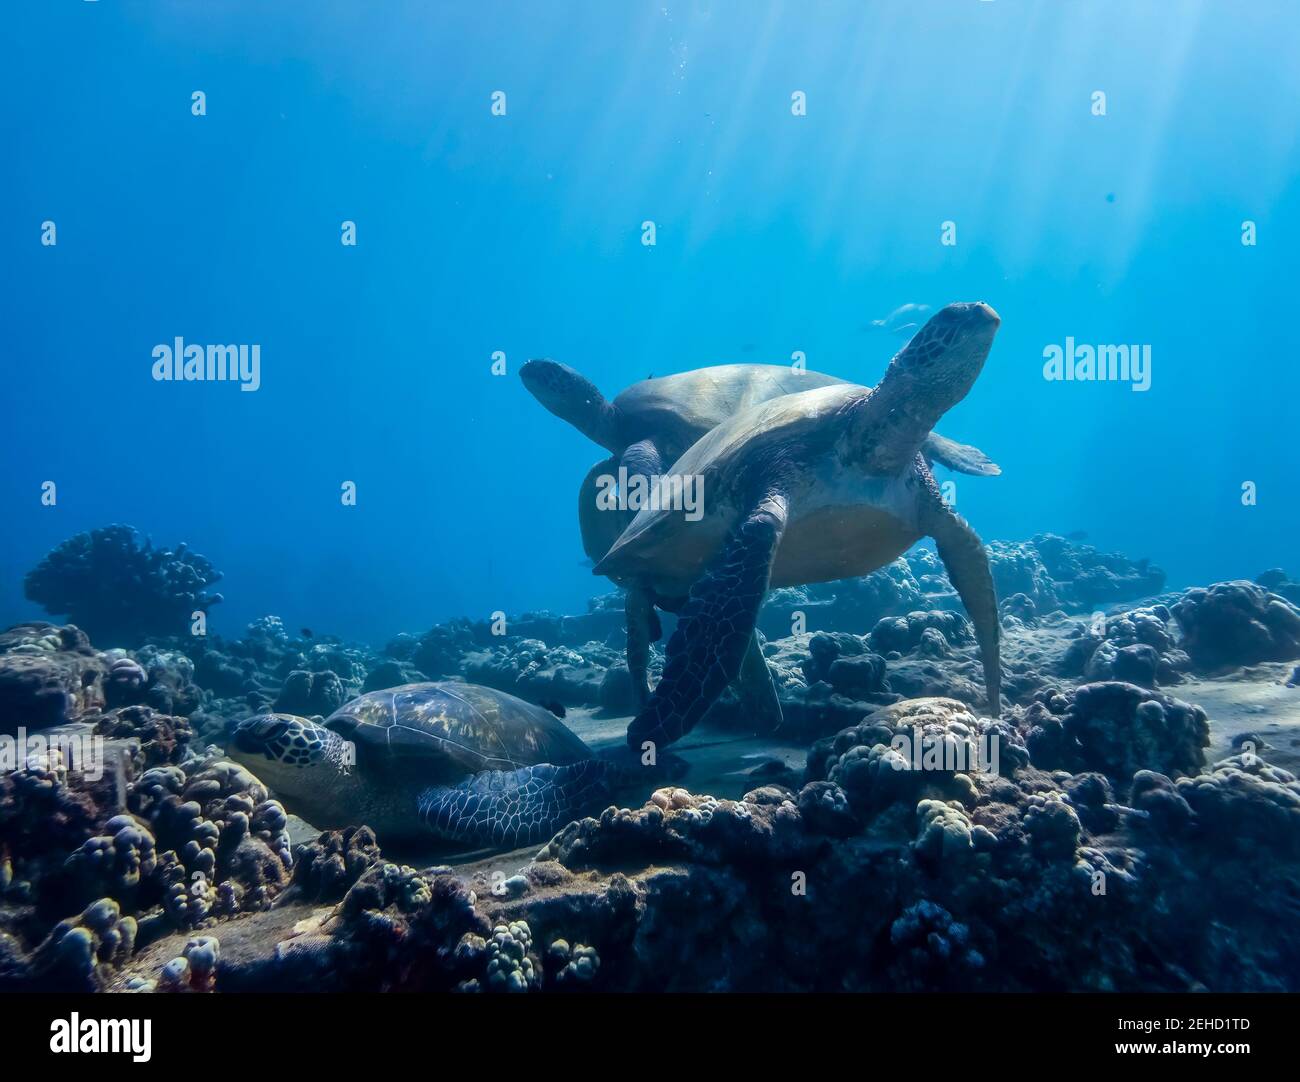 Group of Hawaiian green sea turtles relaxing on underwater reef in rays of light. Stock Photo